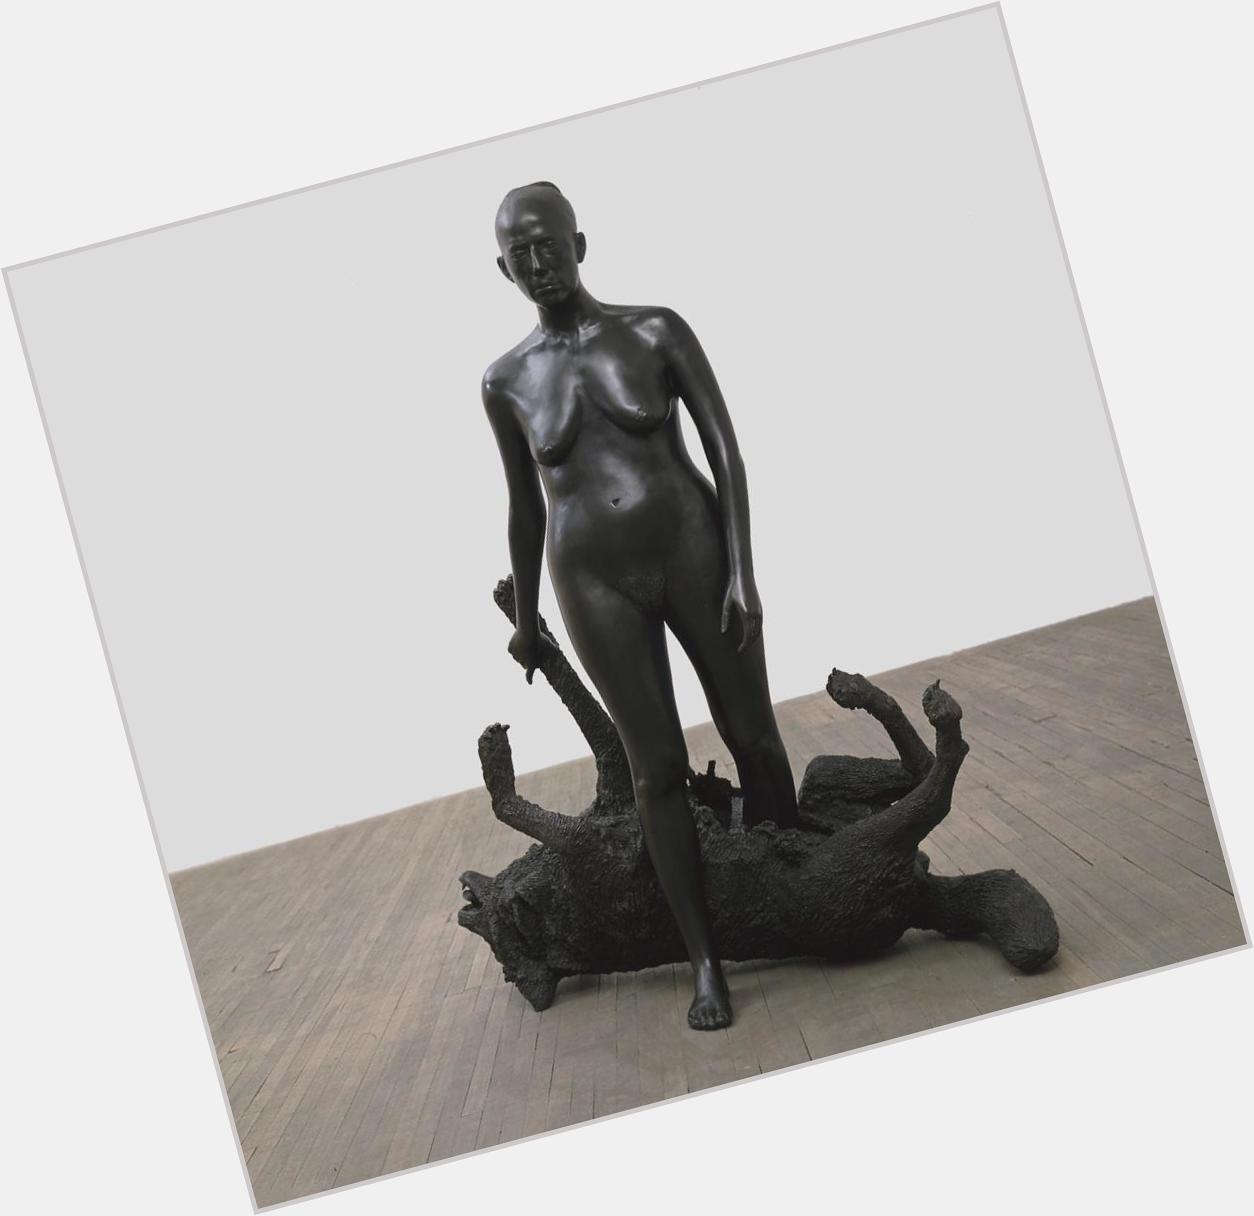 Happy Birthday to Kiki Smith. Beautiful sculptures, the black is \the new black\. 